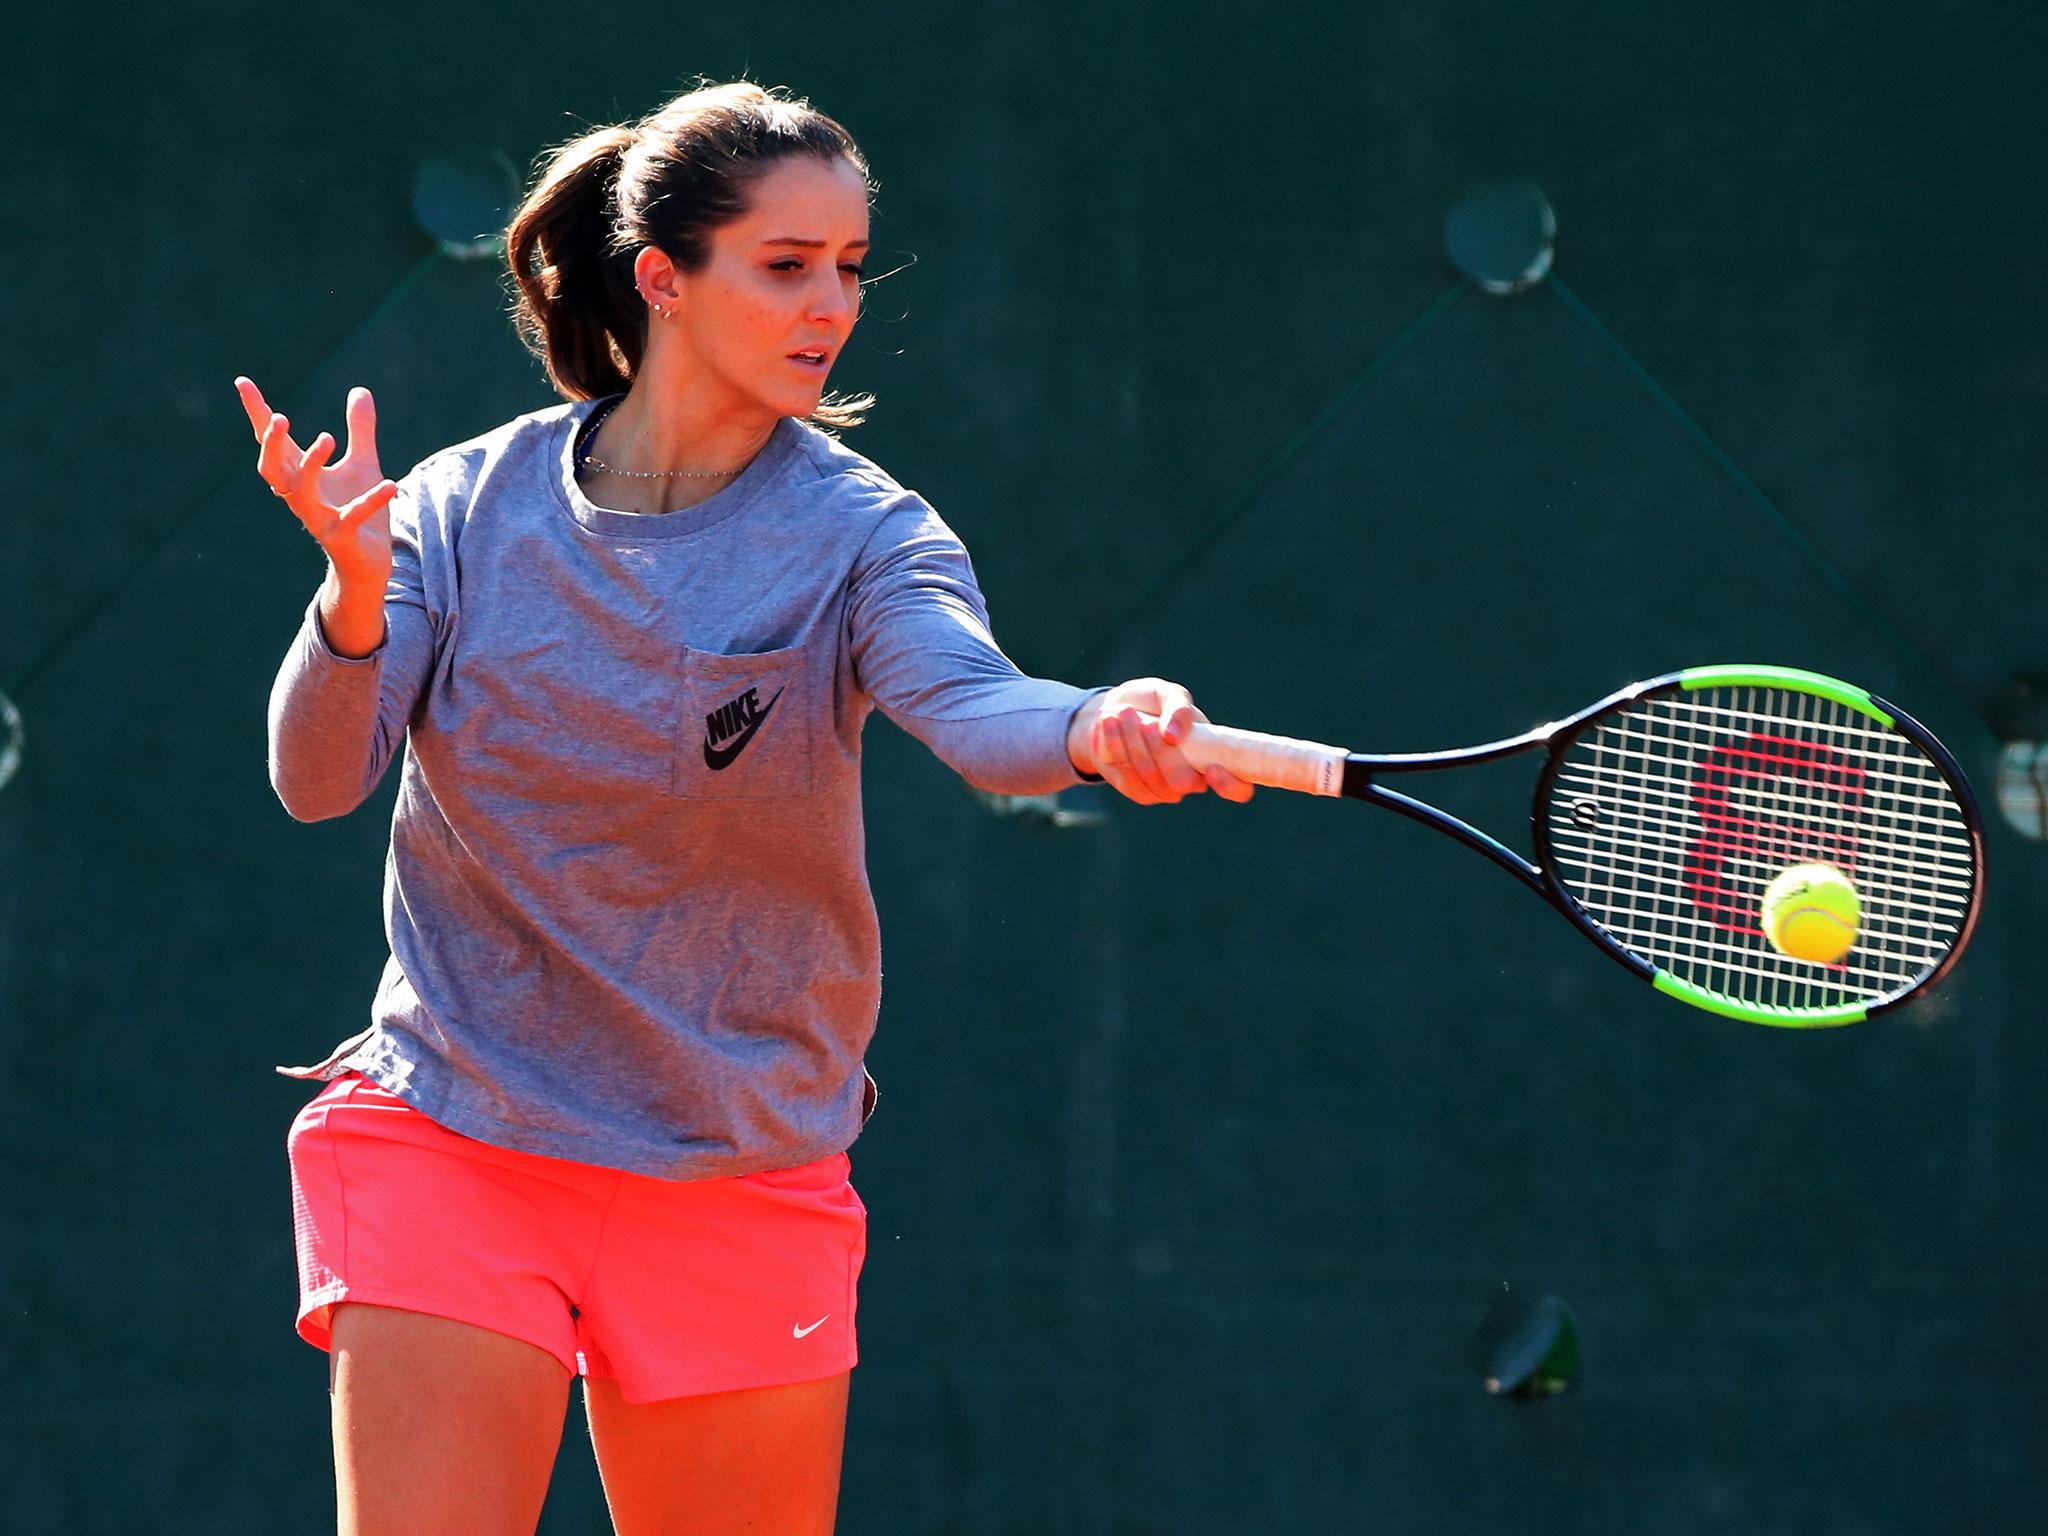 Laura Robson's triumph in Japan will move her back inside the top 200 in the world rankings